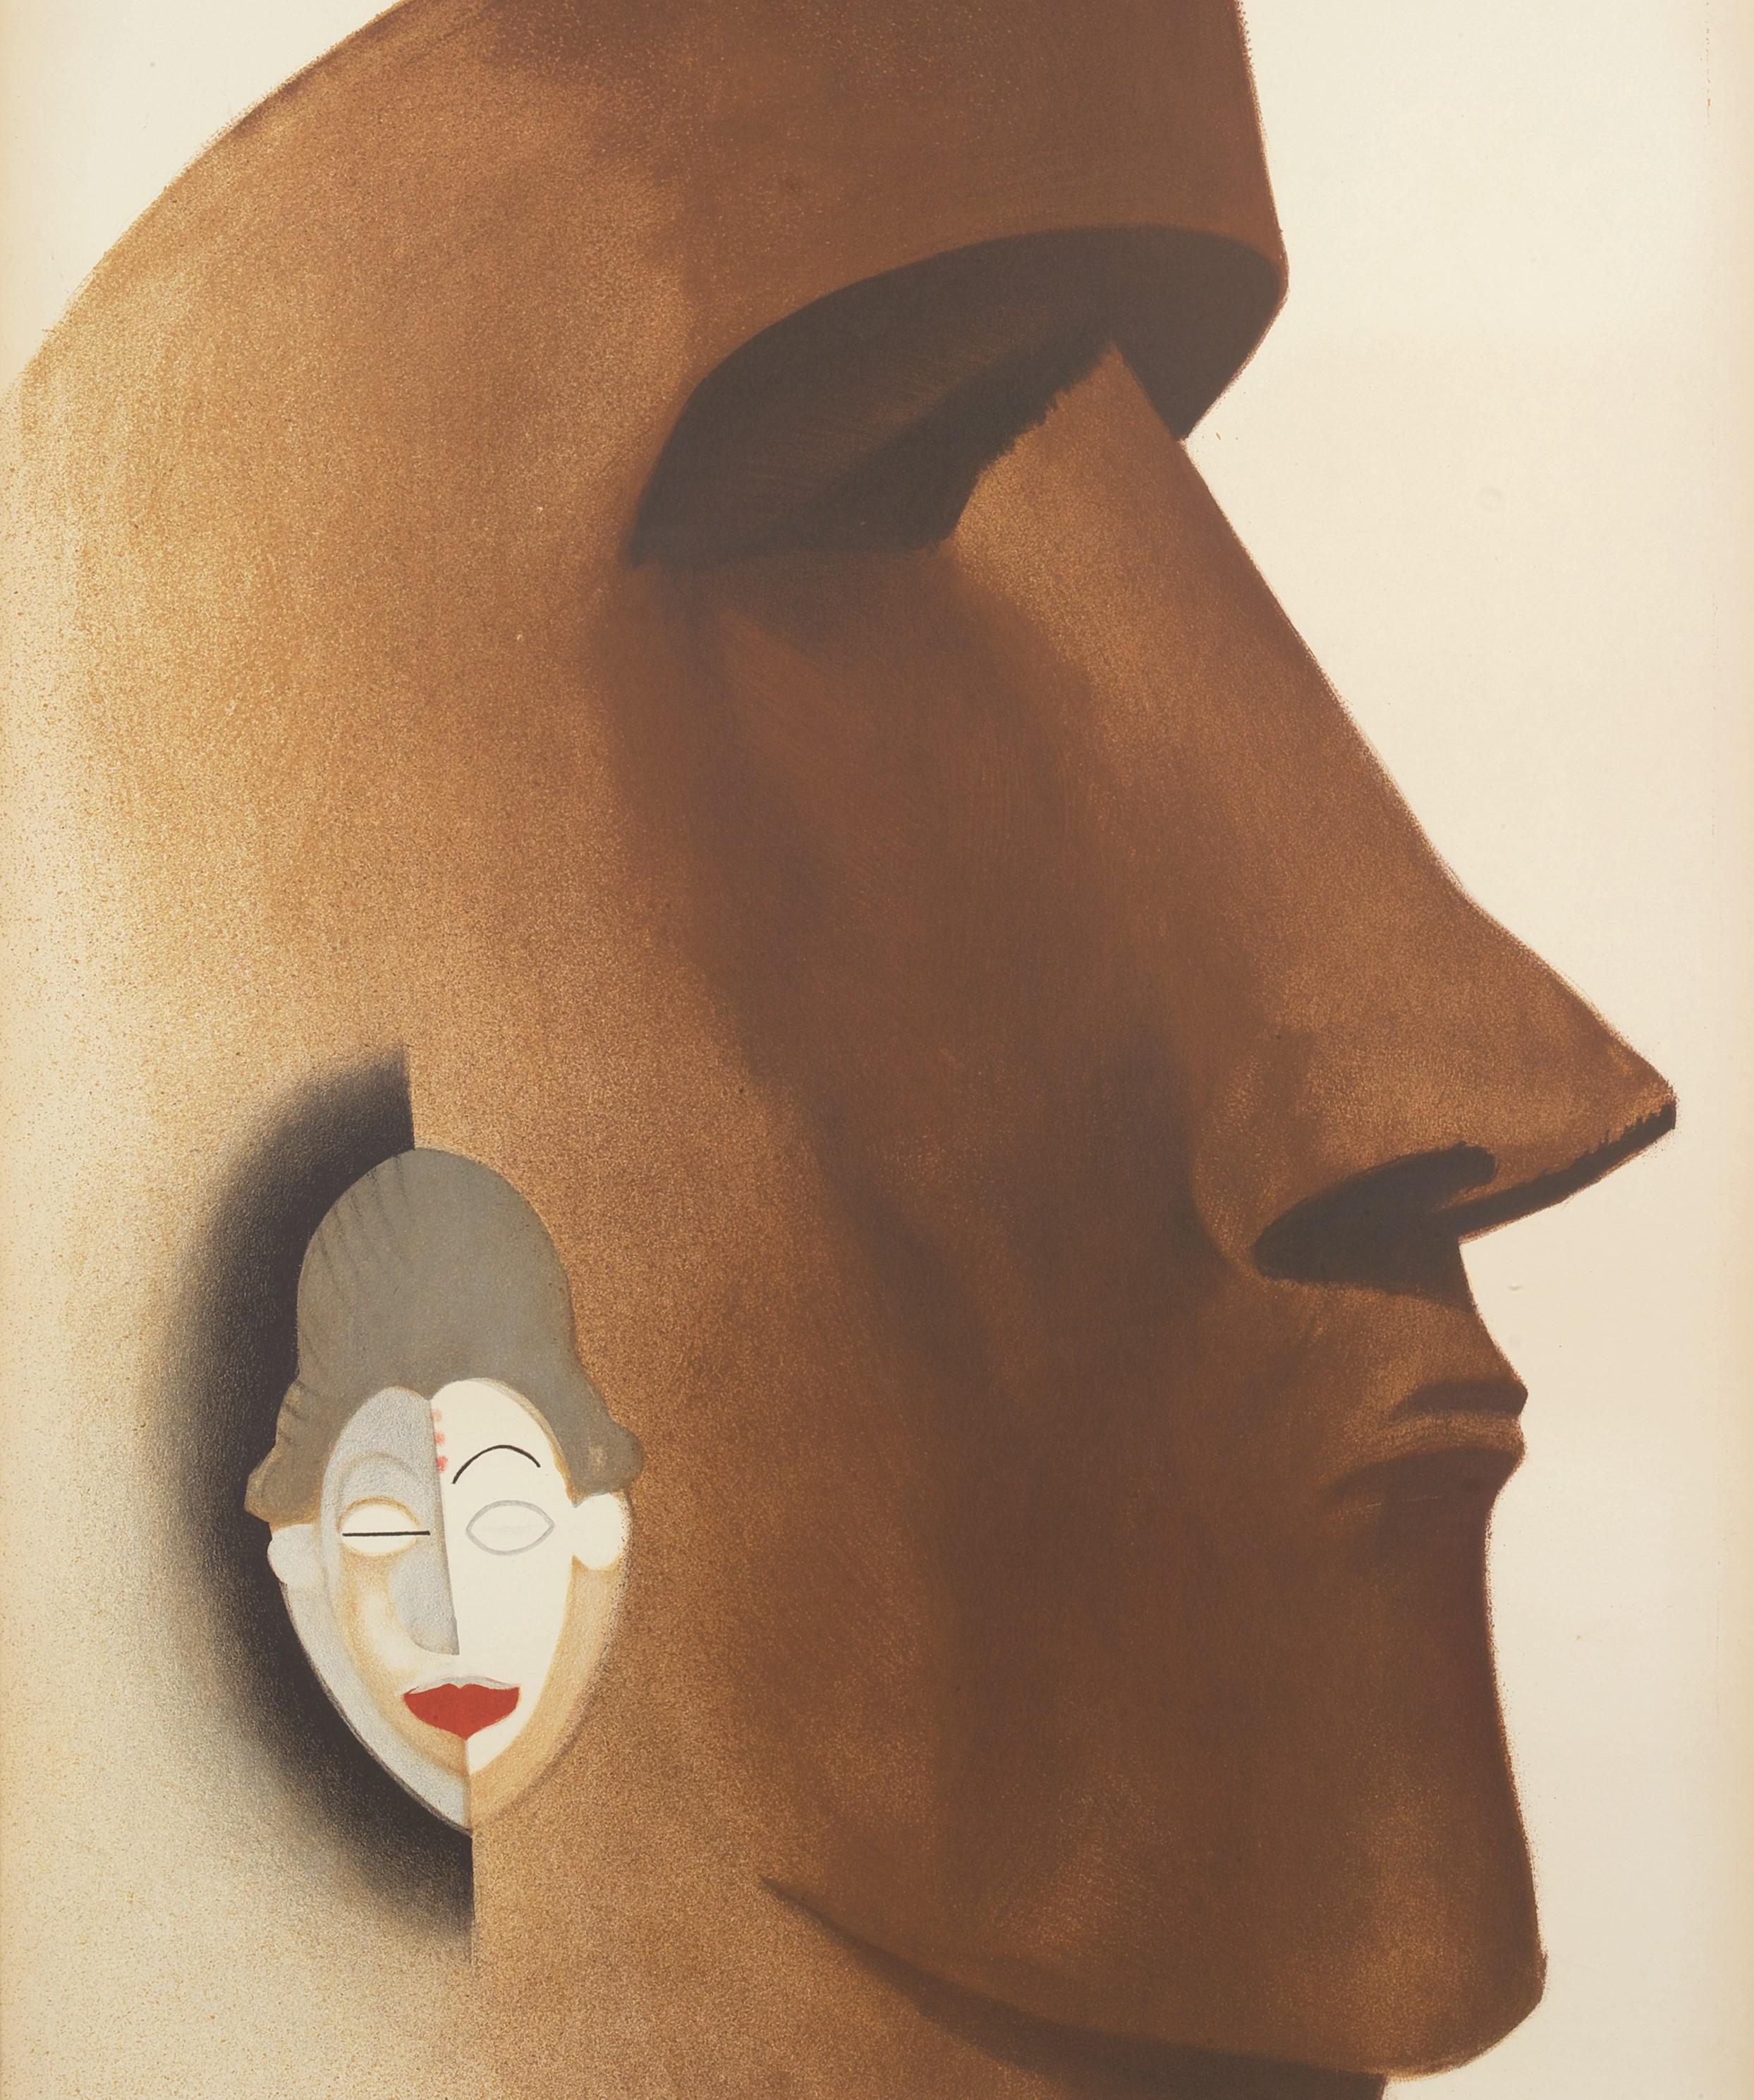 Art Deco poster of African and Oceanic inspiration depicting a Punu mask from Gabon and a monumental Moai statue from the Easter Islands.

Paul Colin (27 June 1892 – 18 June 1985) born in Nancy, France, died in Nogent-sur-Marne.

Paul Colin is an